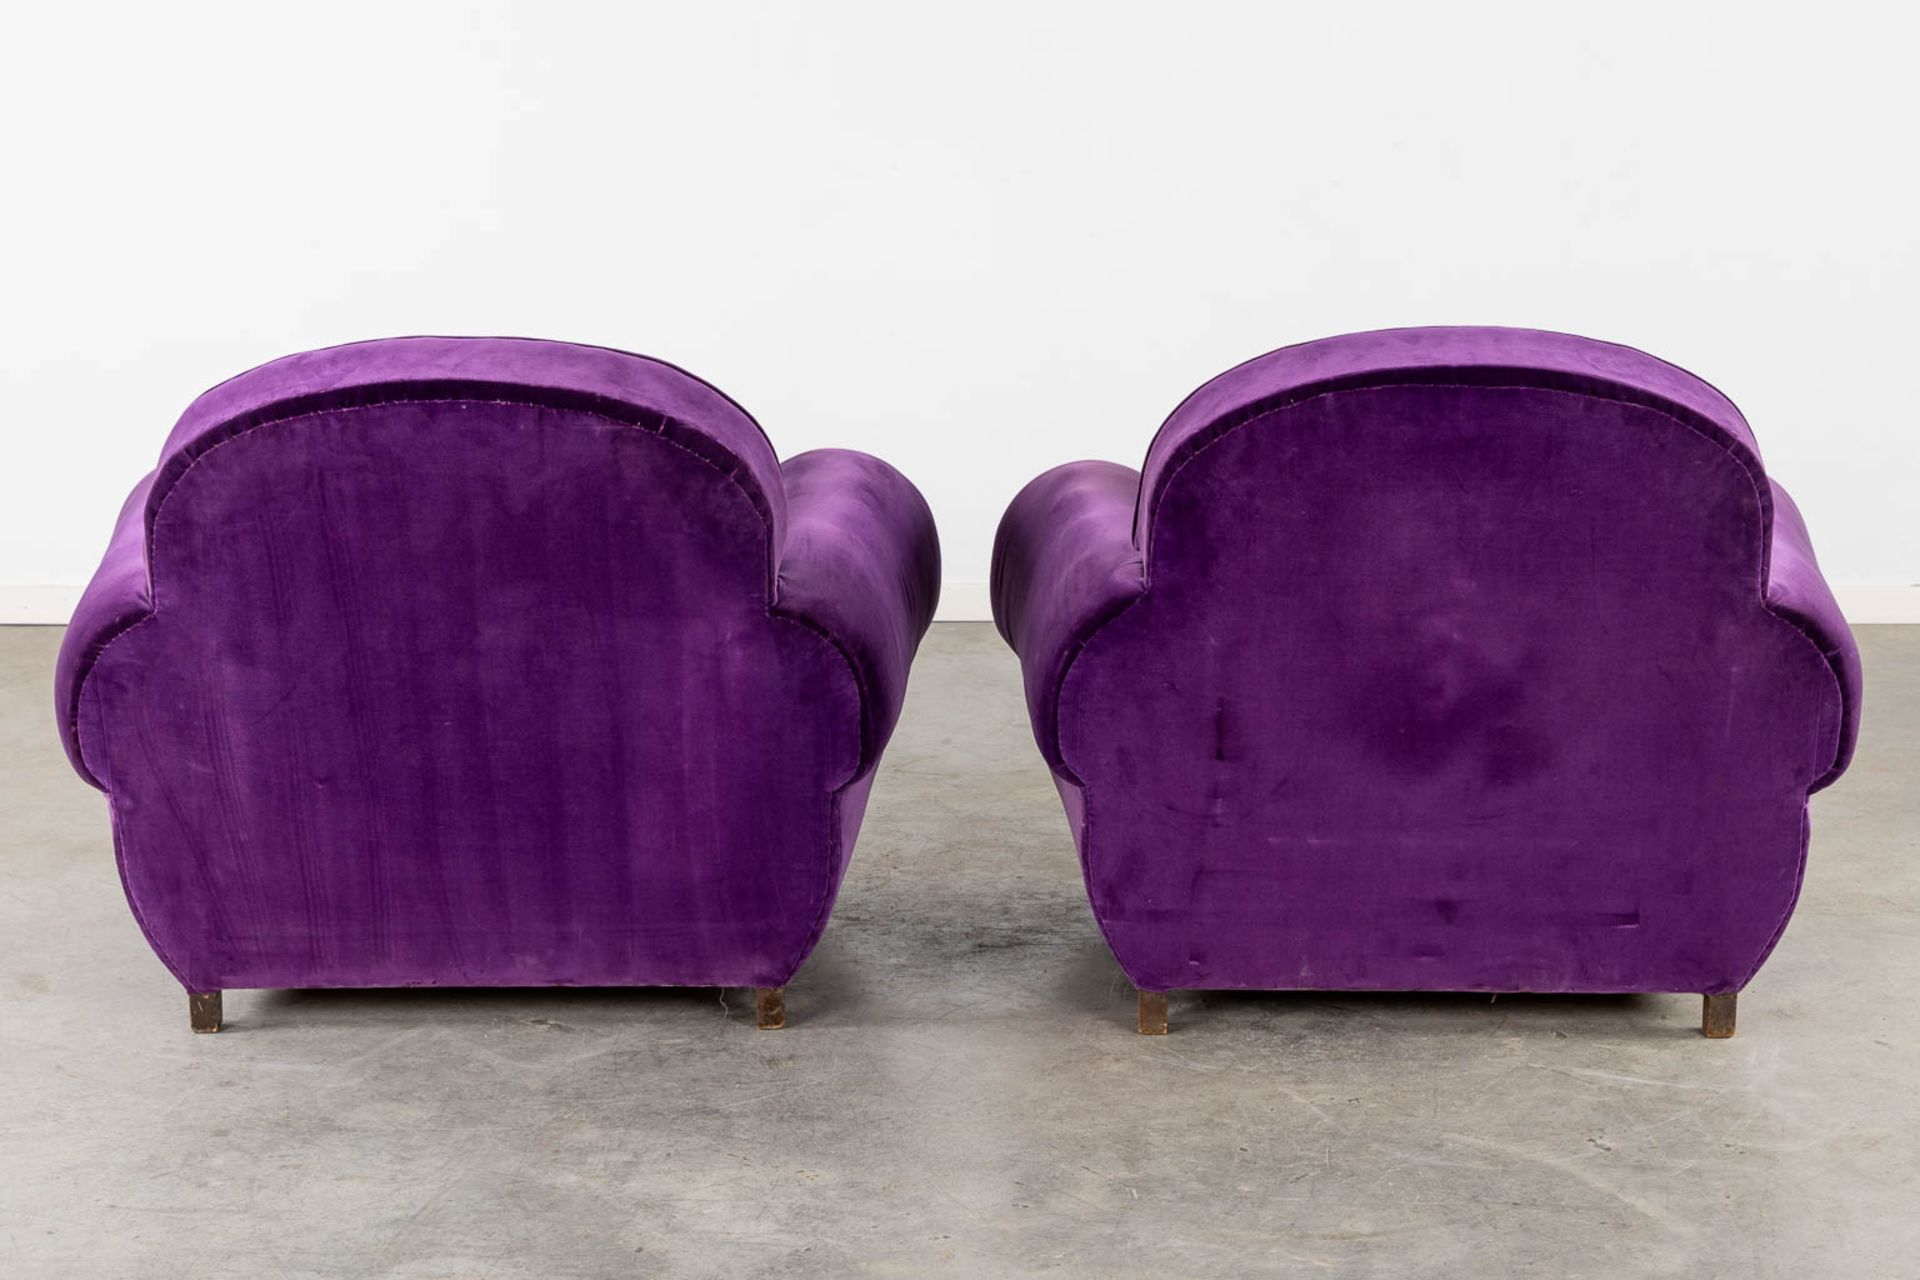 A pair of armchairs with purple fabric upholstry, France, Art Deco. (L:84 x W:109 x H:87 cm) - Image 5 of 10